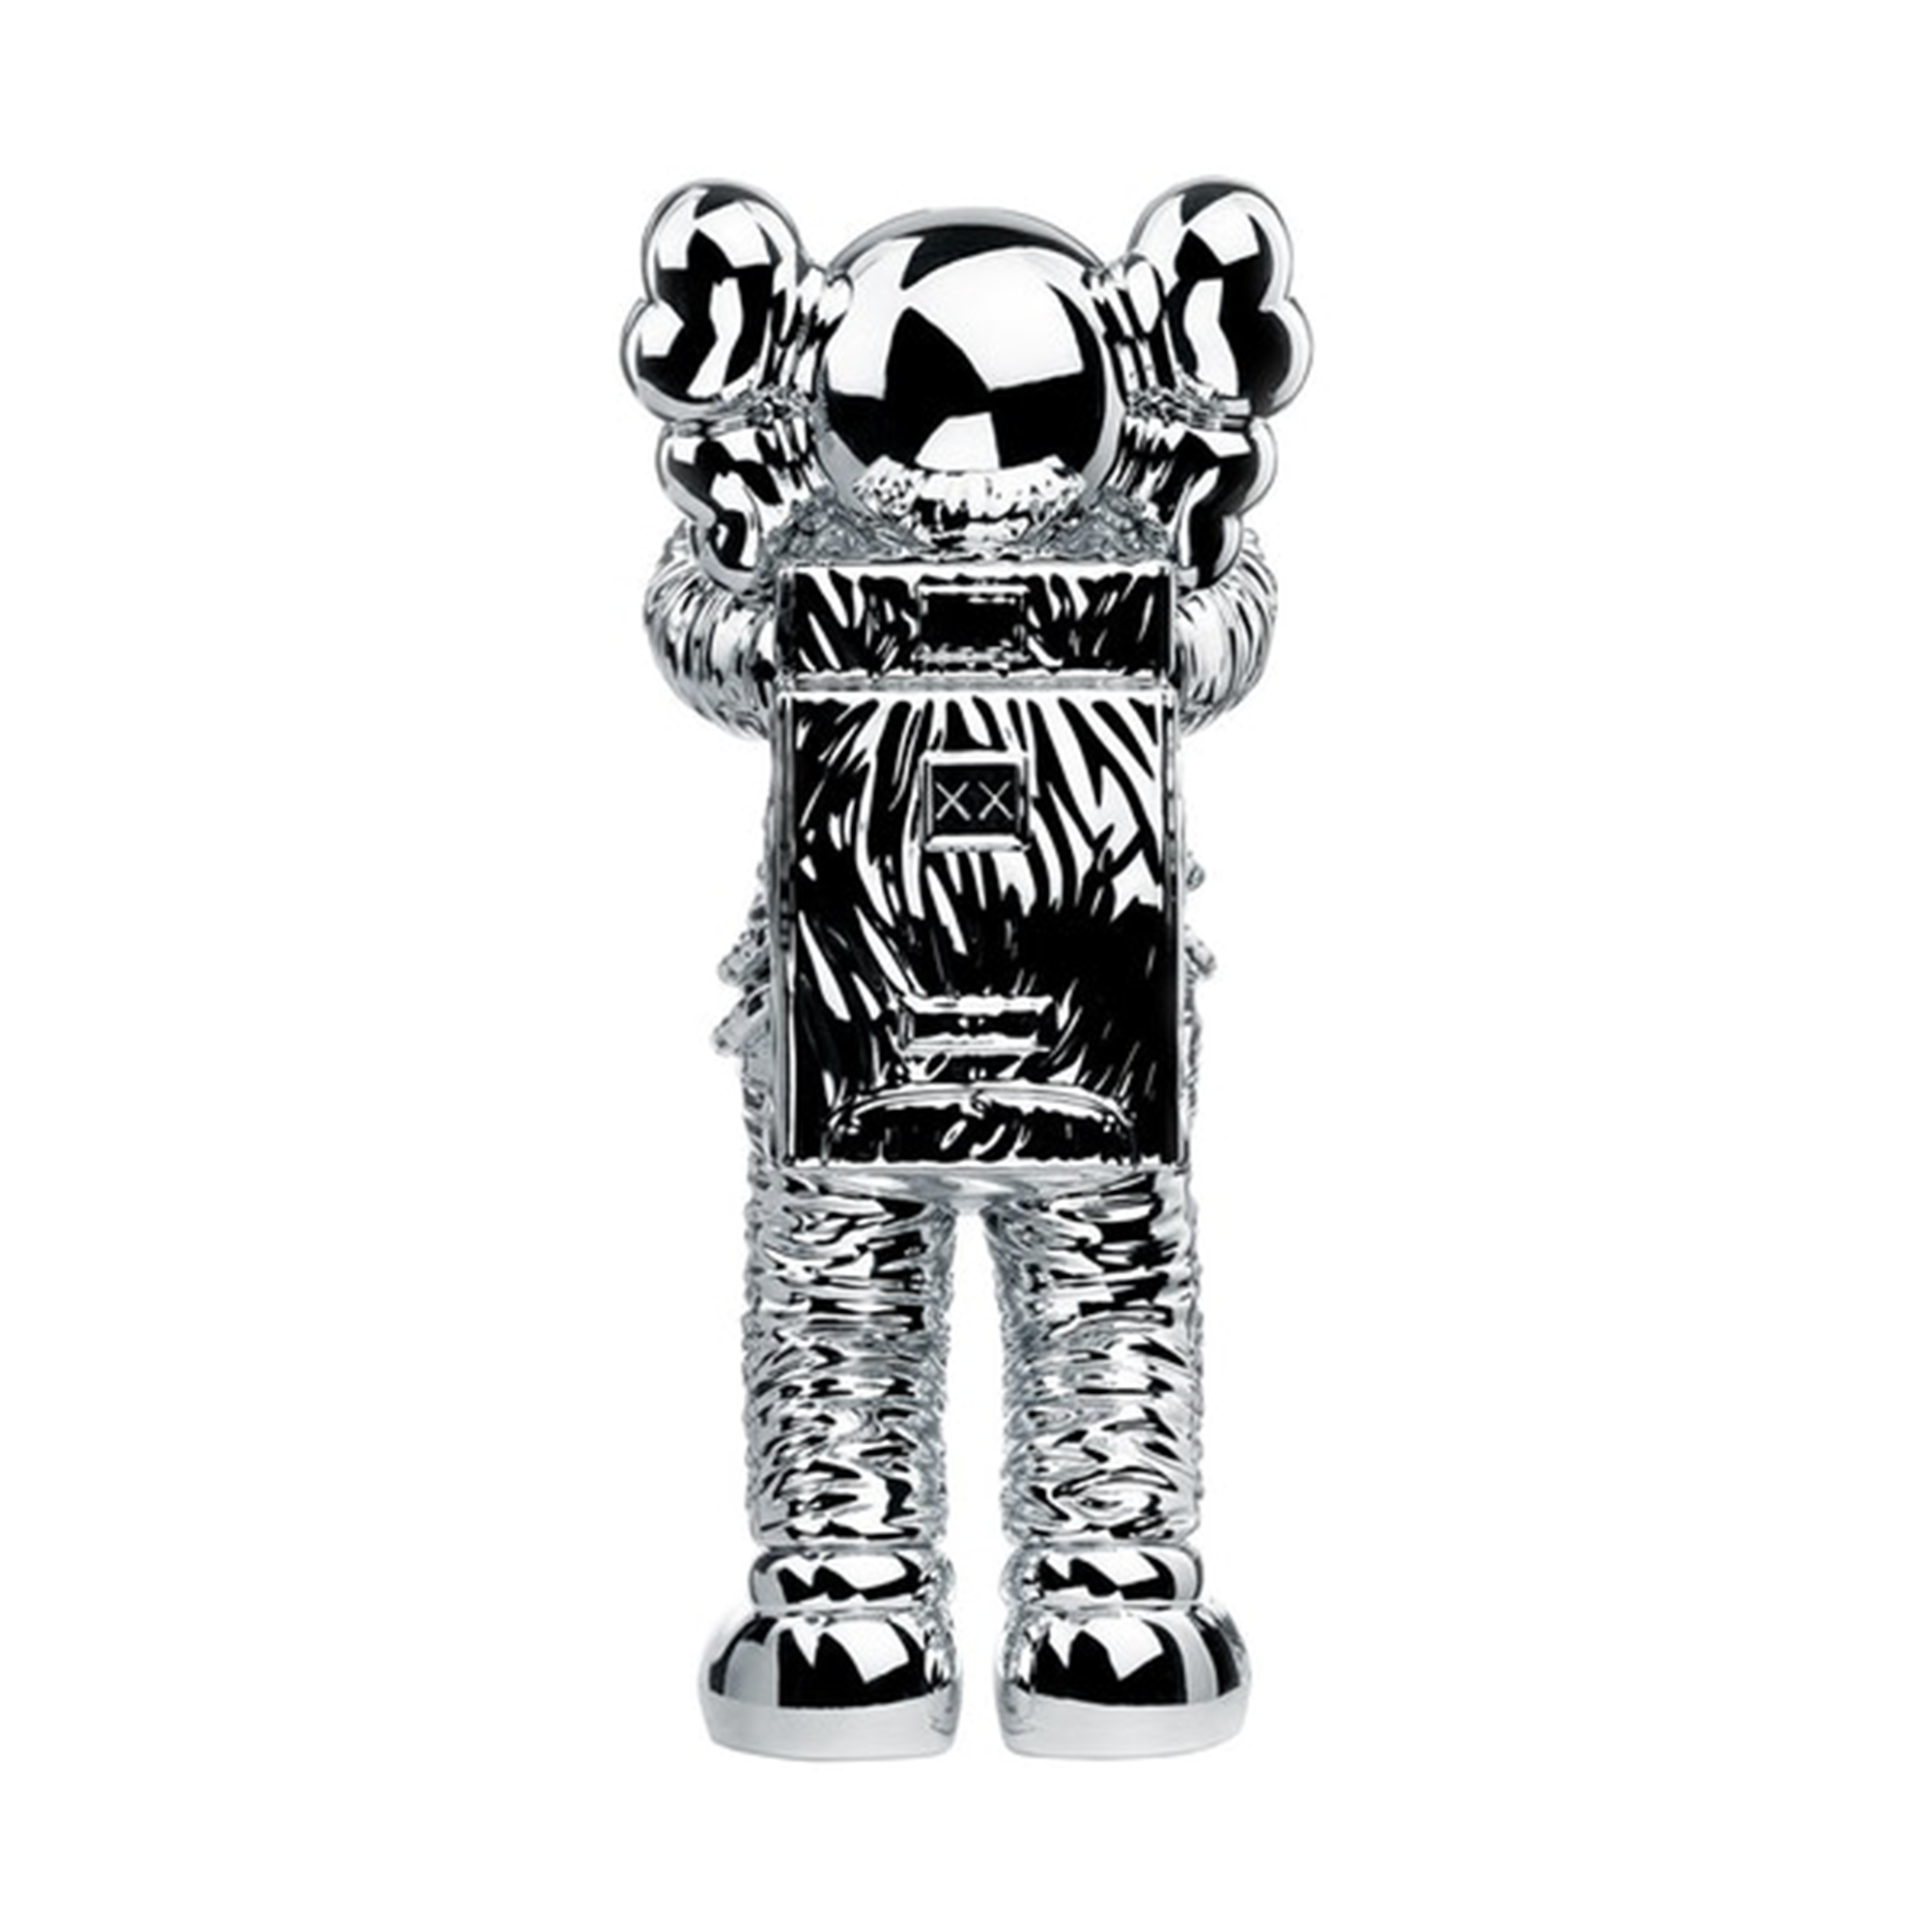 KAWS Holiday Space Figure Silver-PLUS